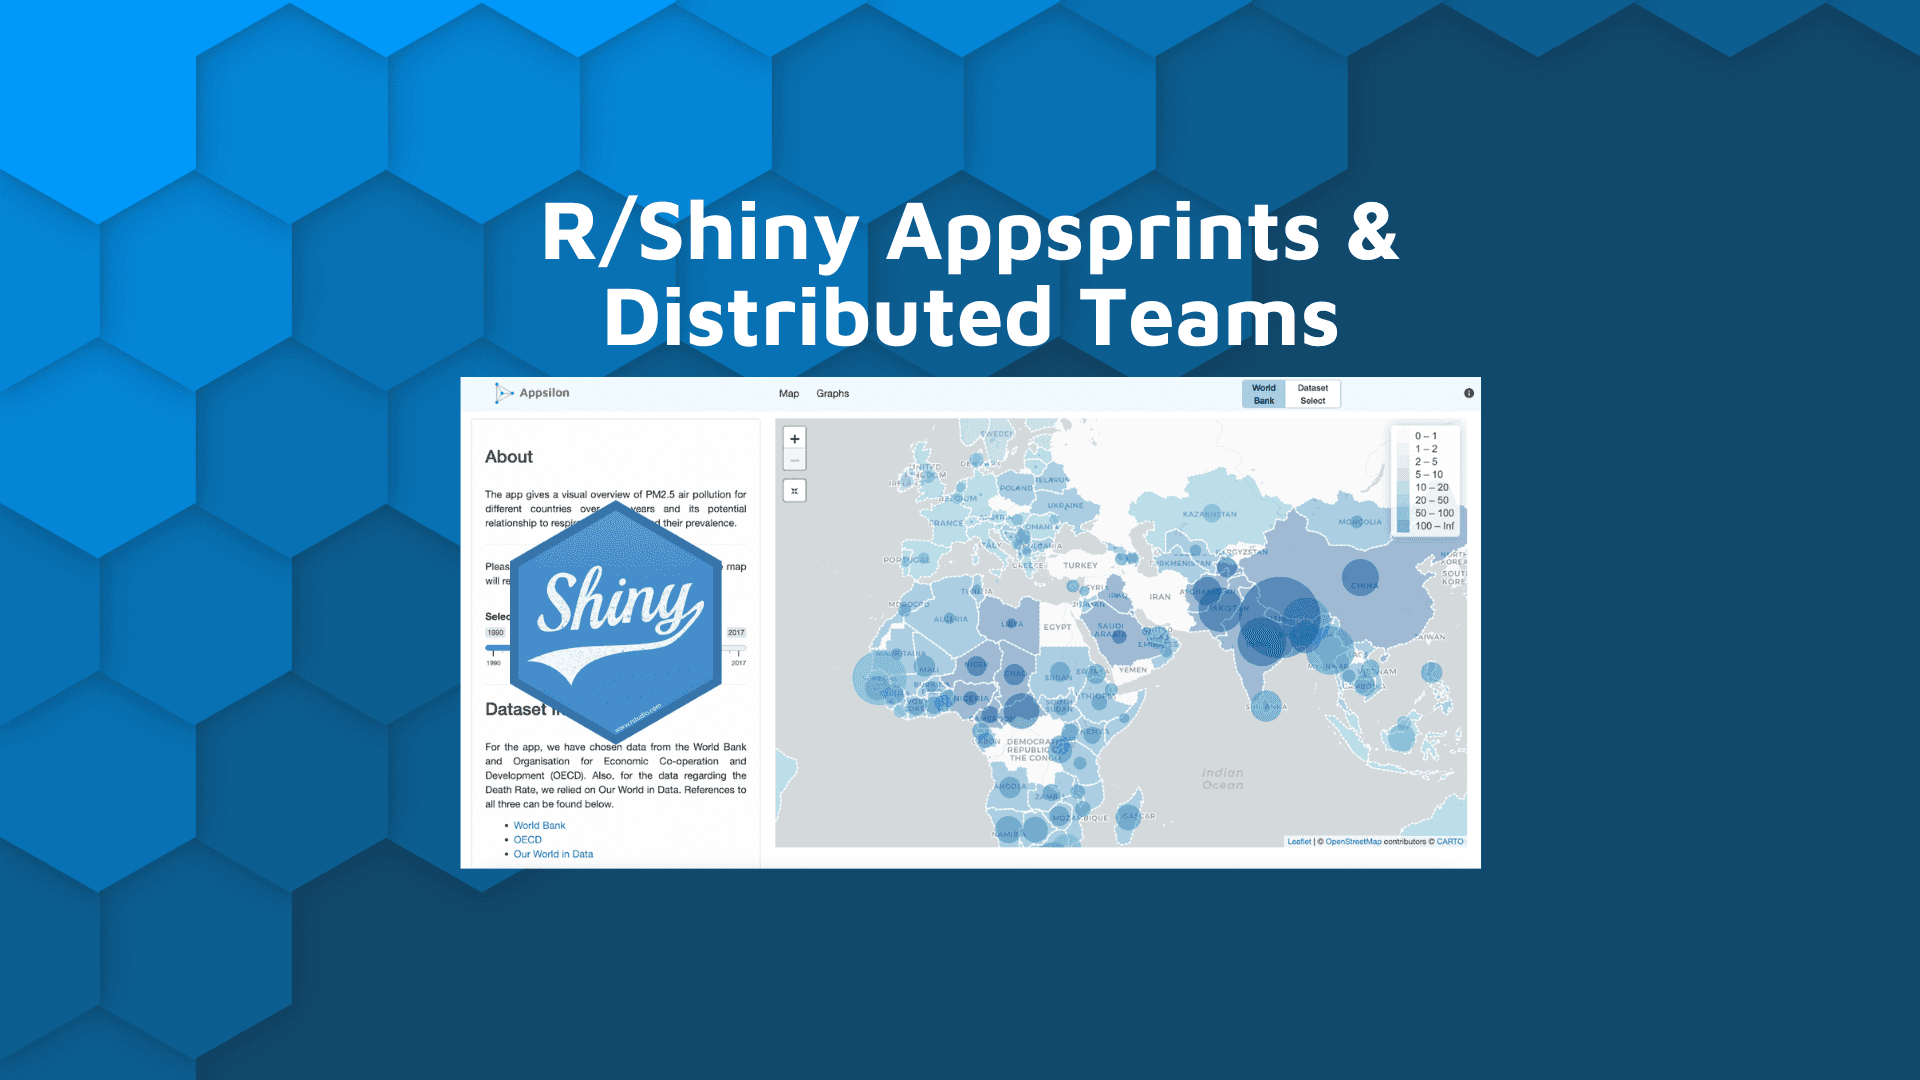 r shiny respiratory disease app blog hero hex banner for R/Shiny Appsprints and Distributed Teams